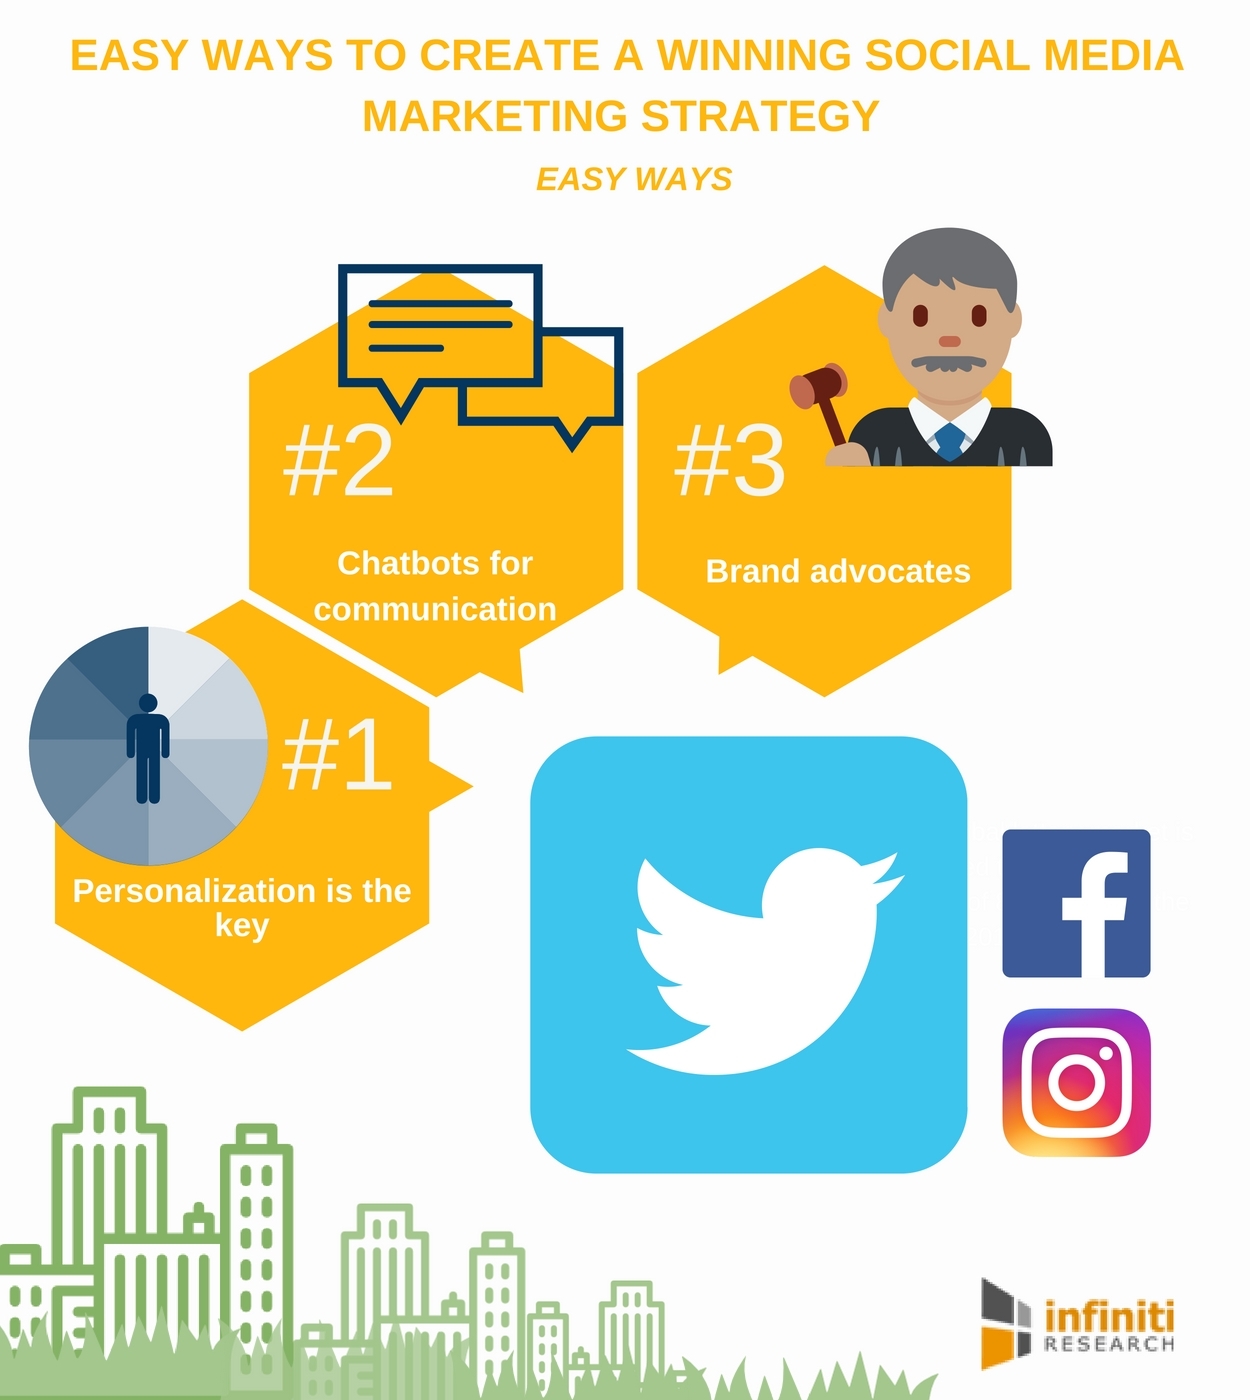 How to Build Your Social Media Marketing Strategy